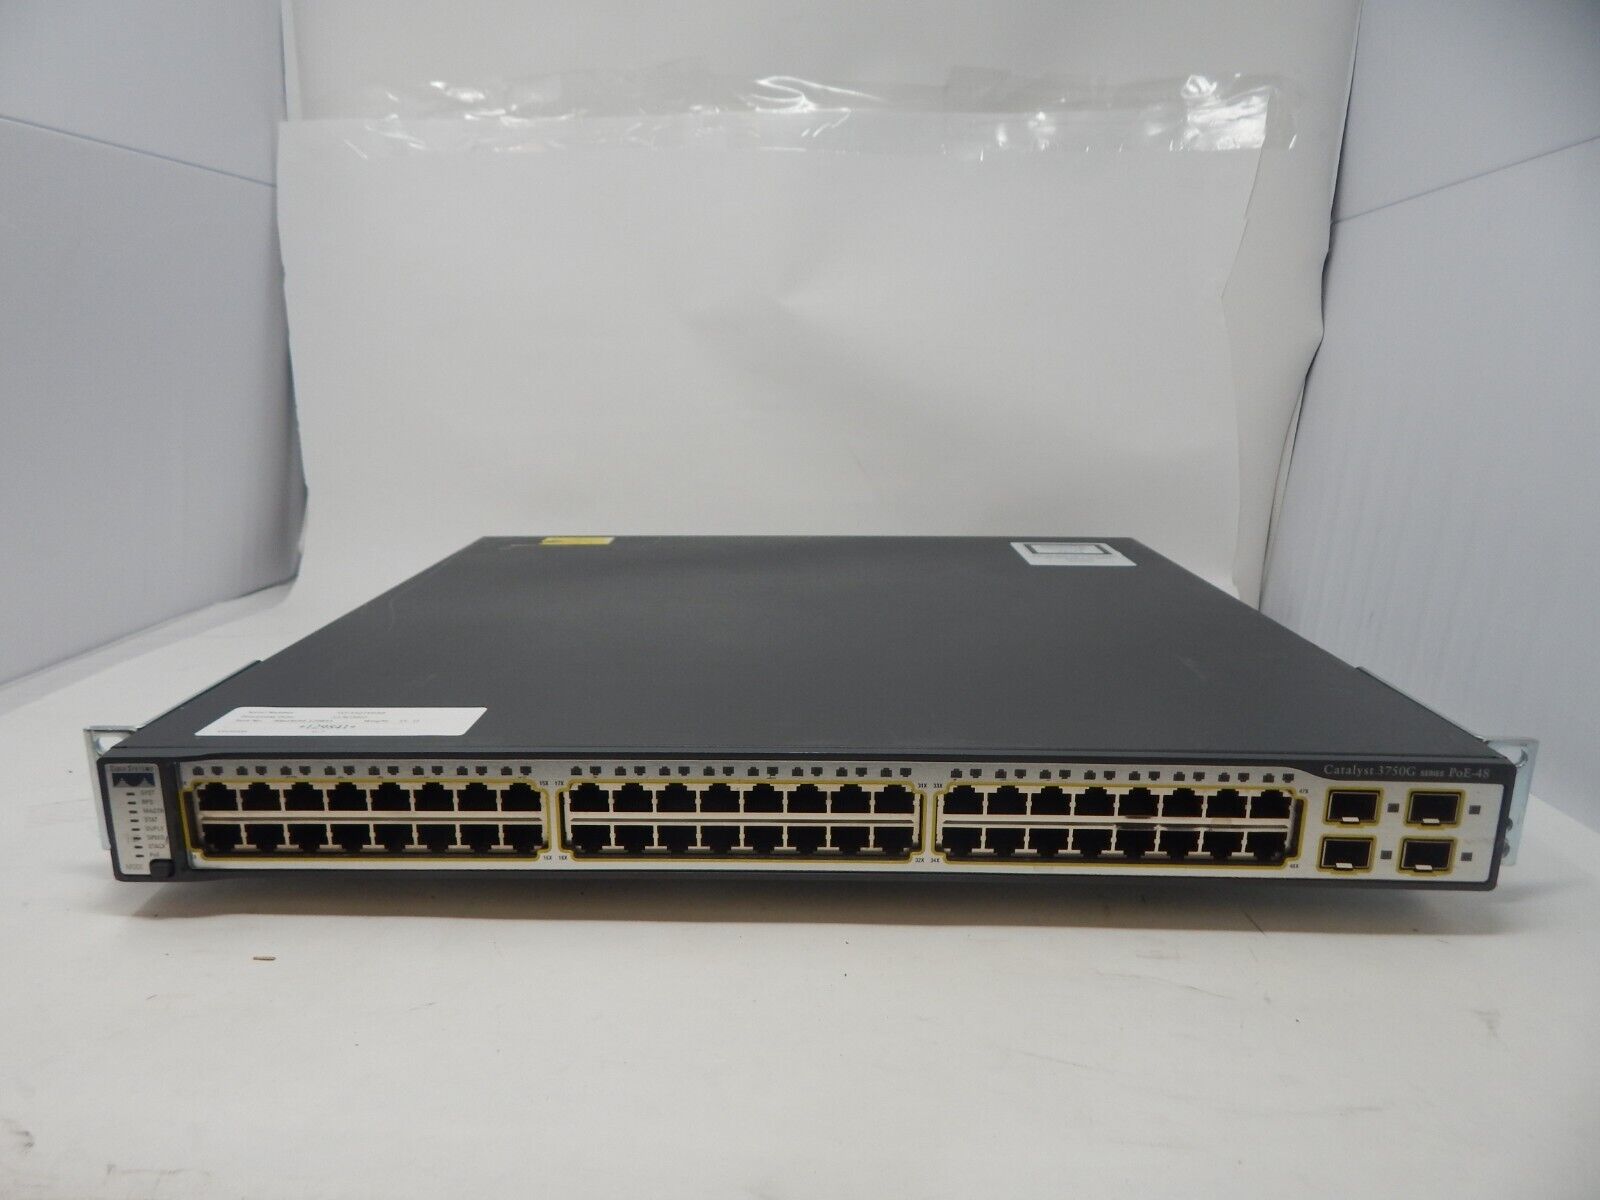 Cisco Catalyst C3750G Series 48 Port Networking Switch WS-C3750G-48PS-S V08